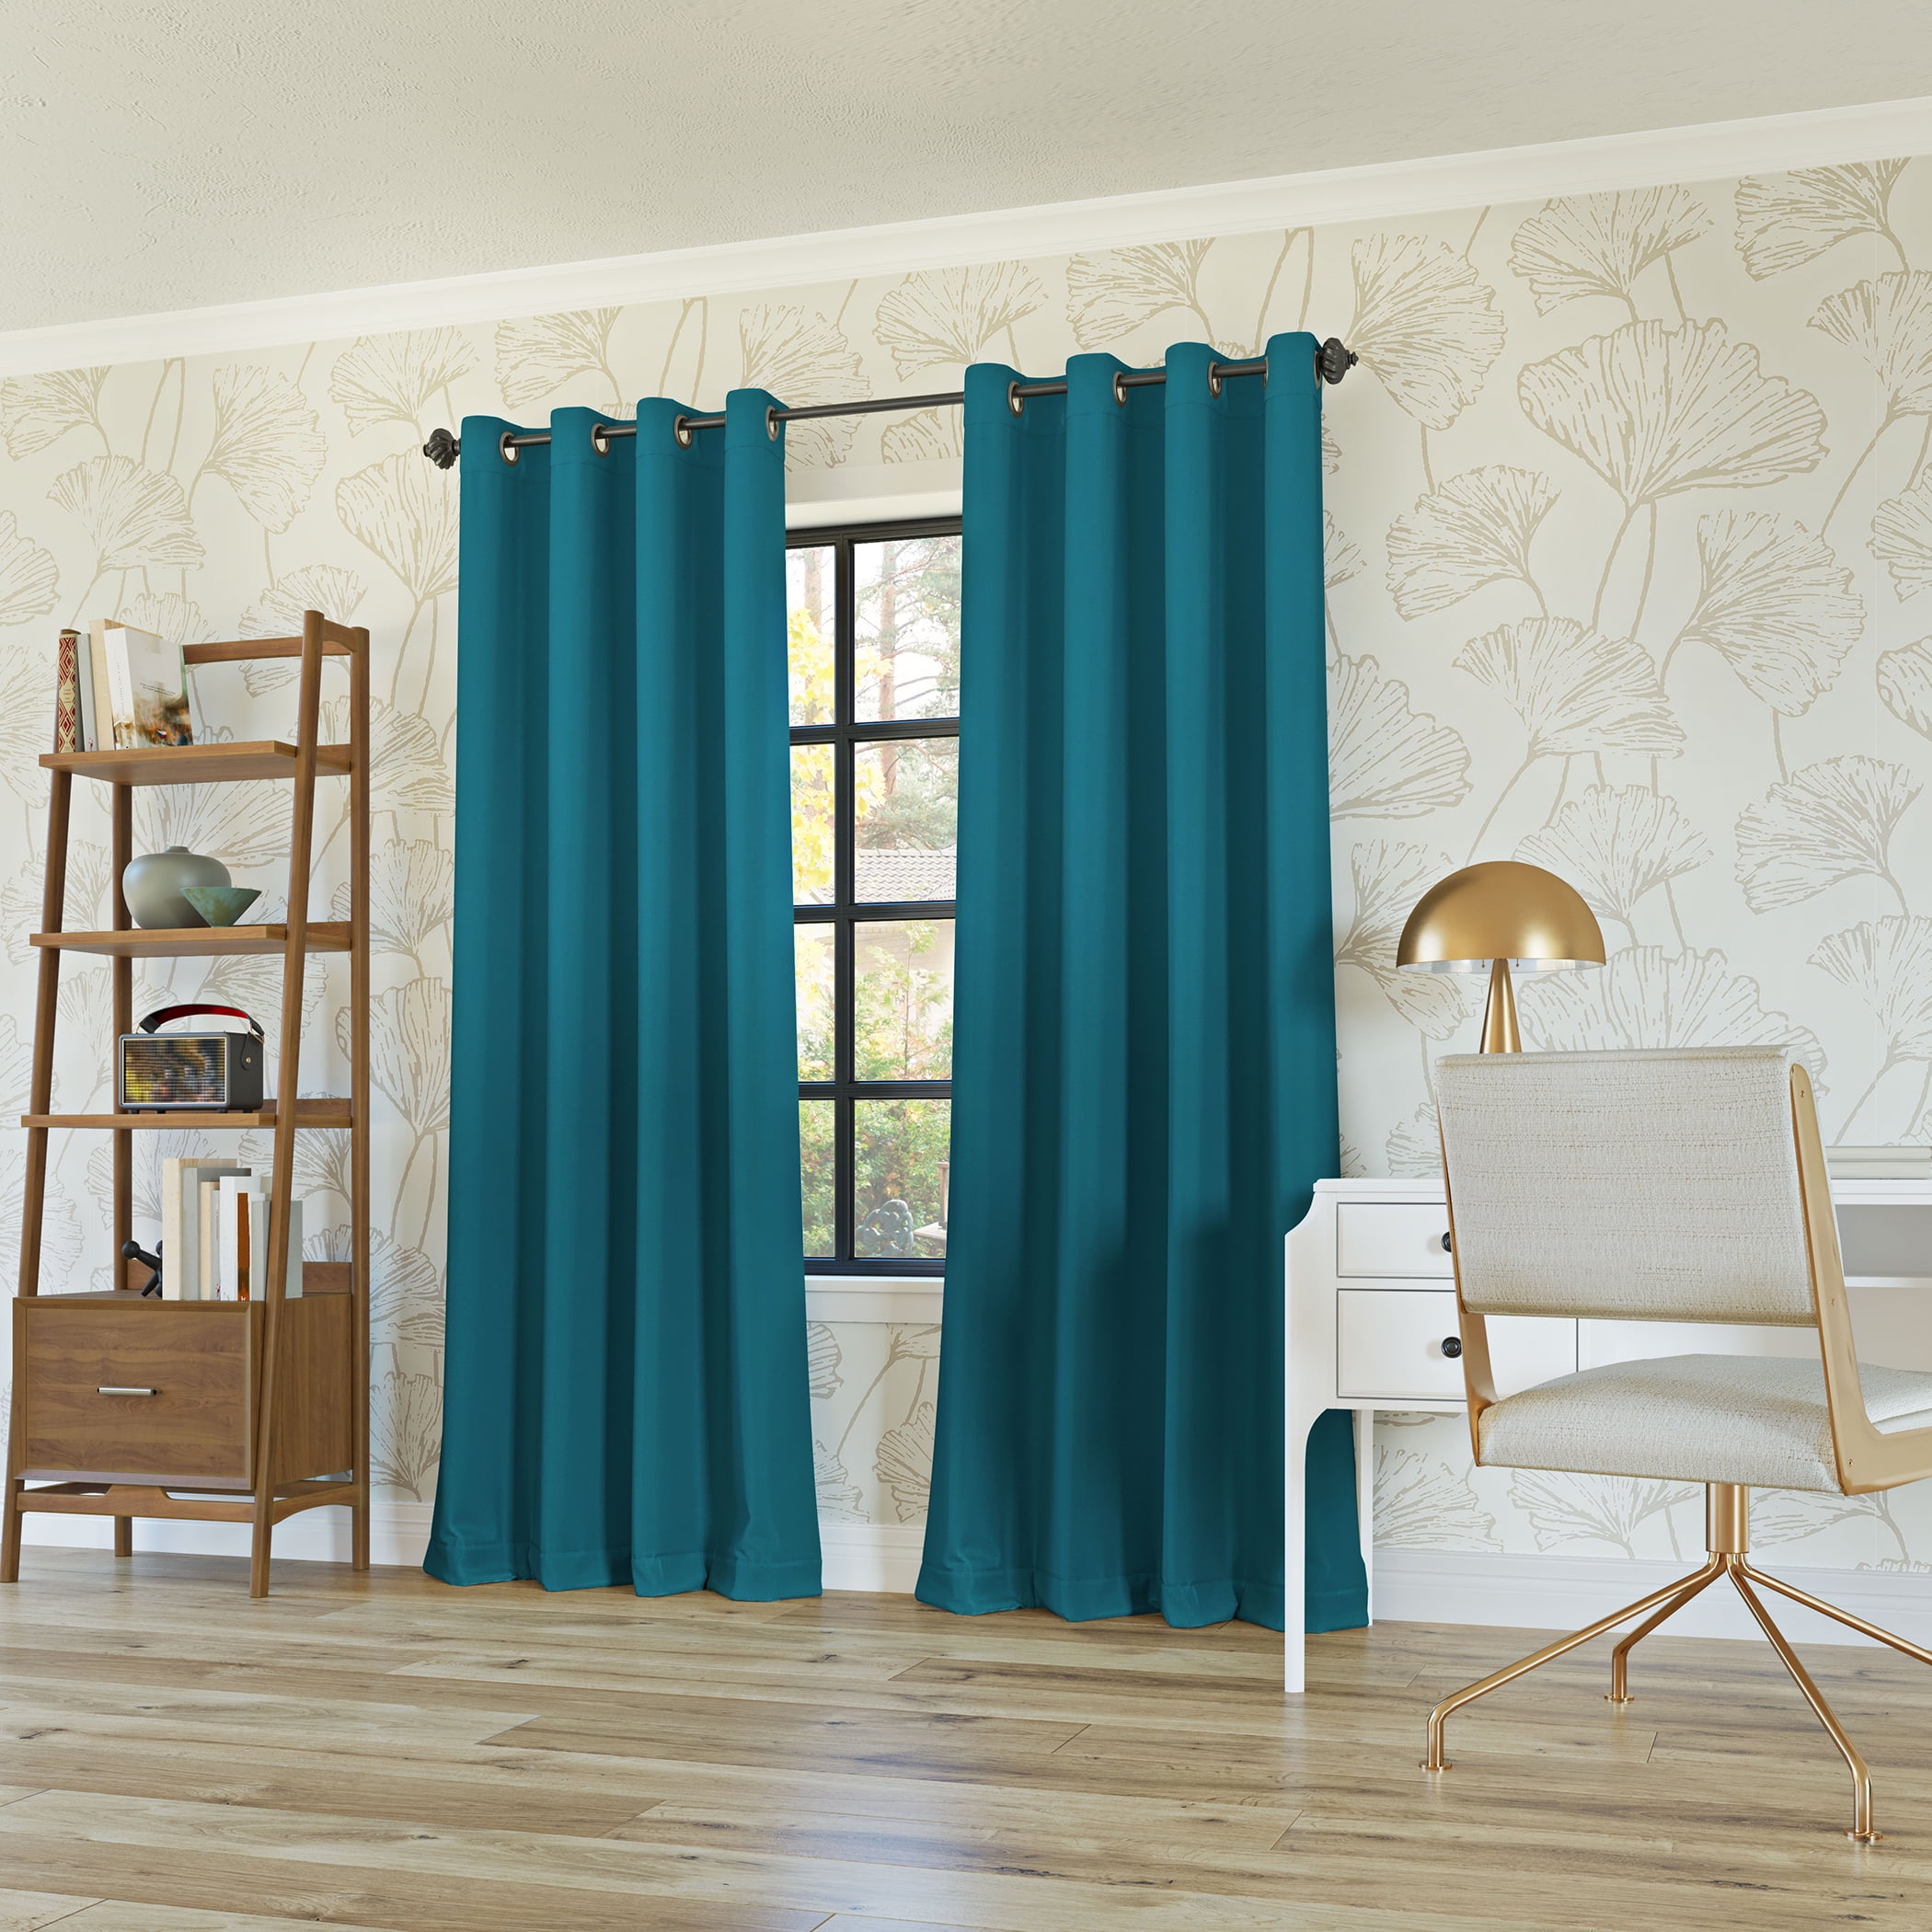 RTS, Turquoise Blue and White Curtain Panels 50W X 84L Drapes Unlined,  Suzani Medallion Window Curtains 